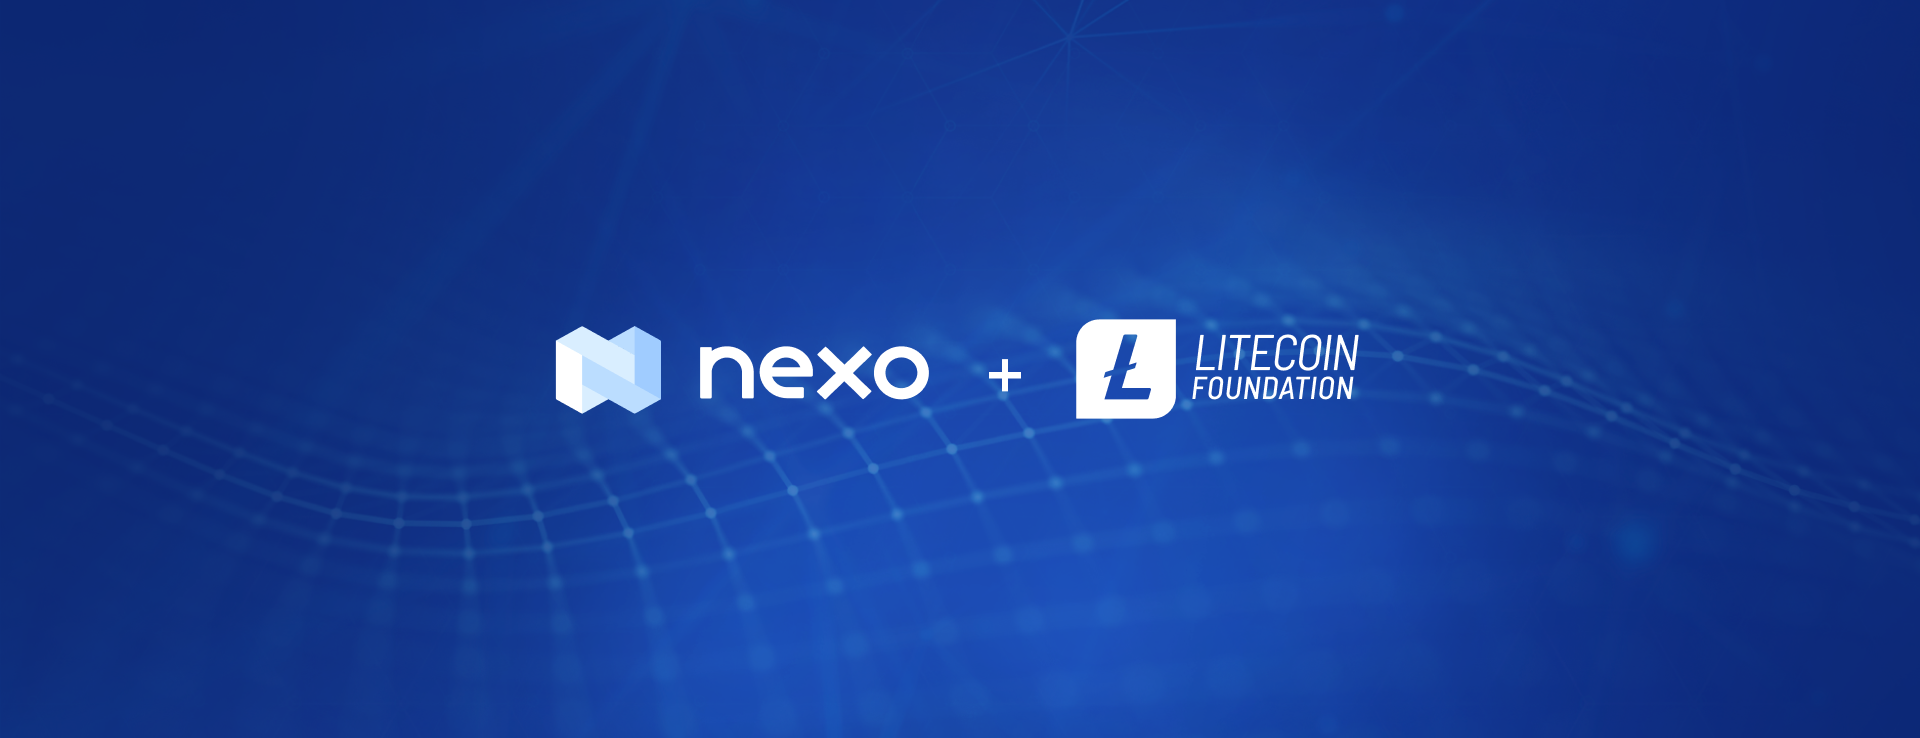 Nexo Now an Official Credit Partner to Litecoin Foundation